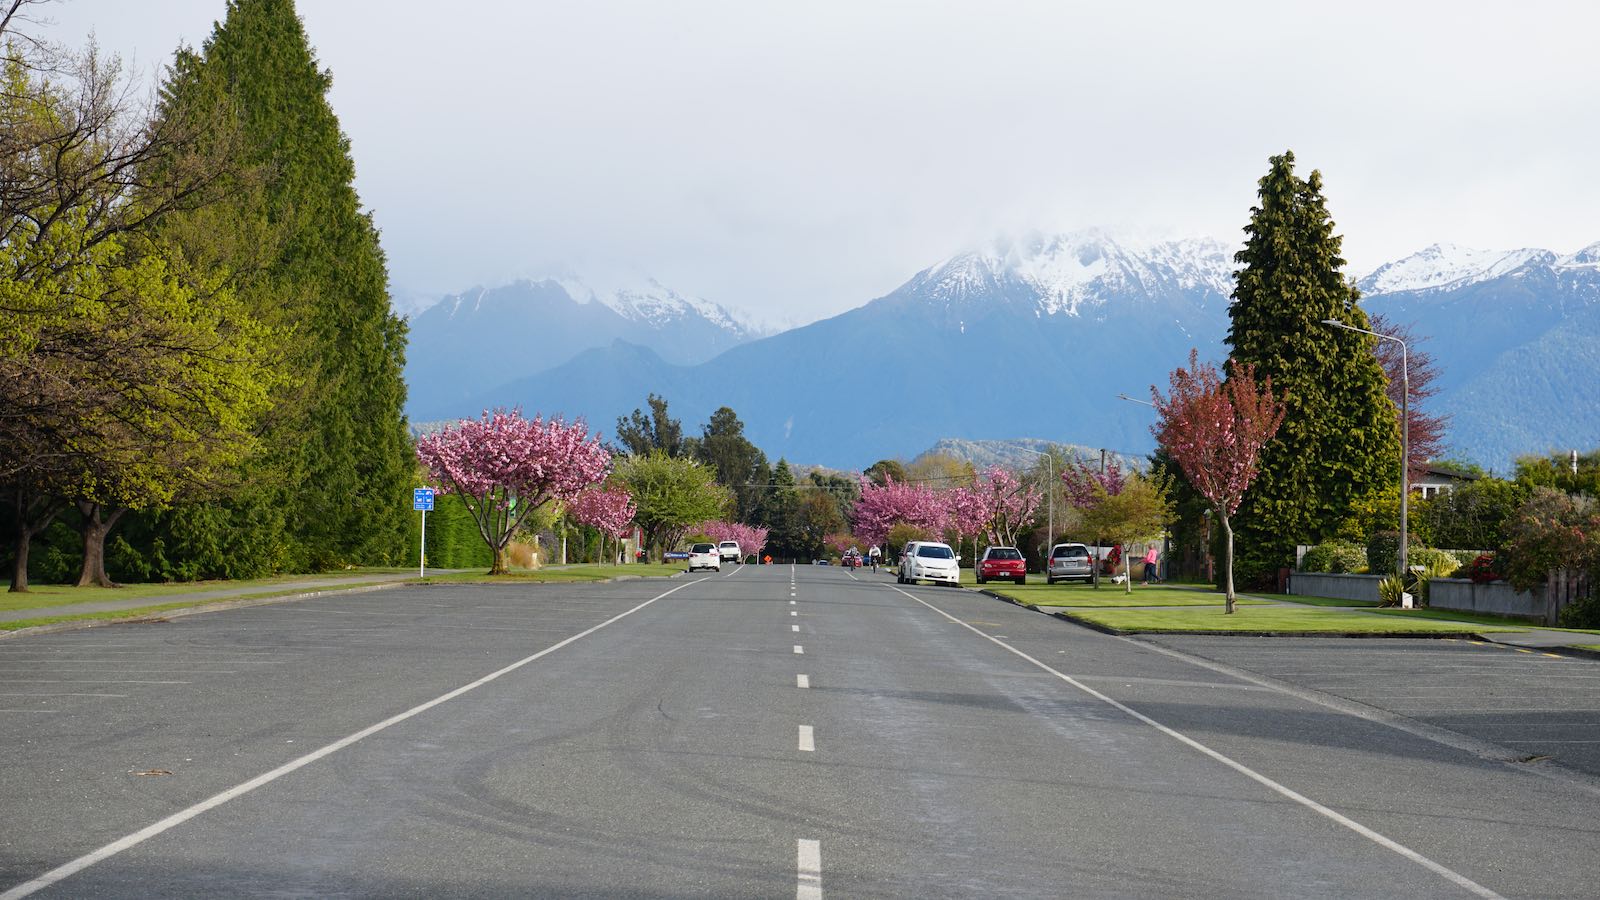 Does not have to be as pretty as this road in southern New Zealand.